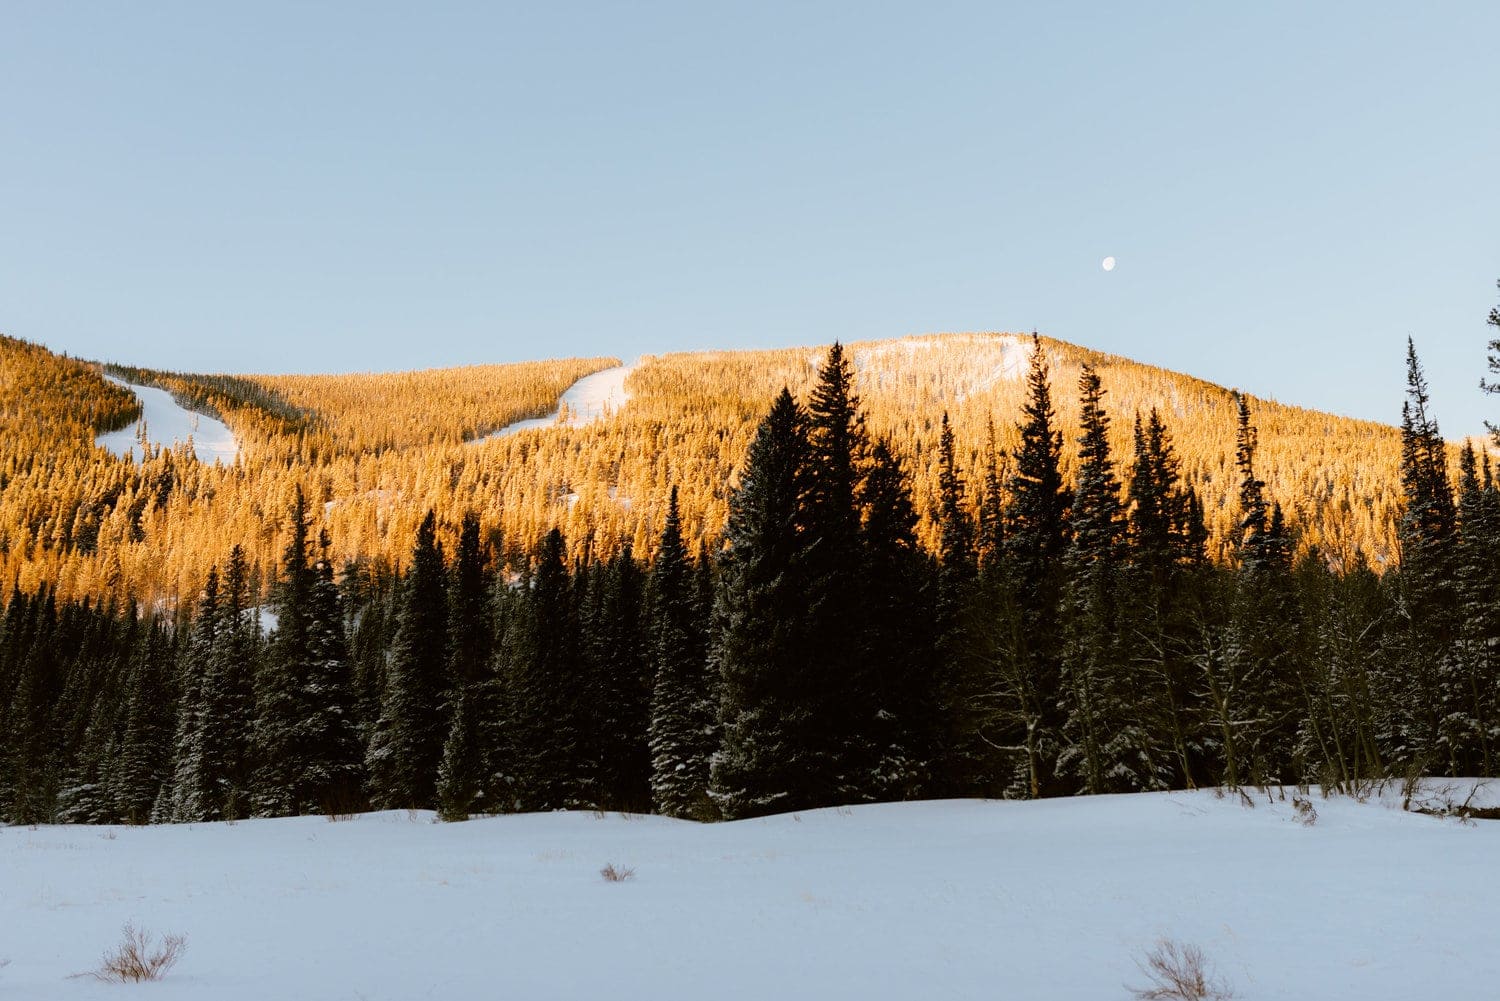 Landscape of snow covering the ground with forest, mountain, and full moon at Indian Peaks, in Colorado. 